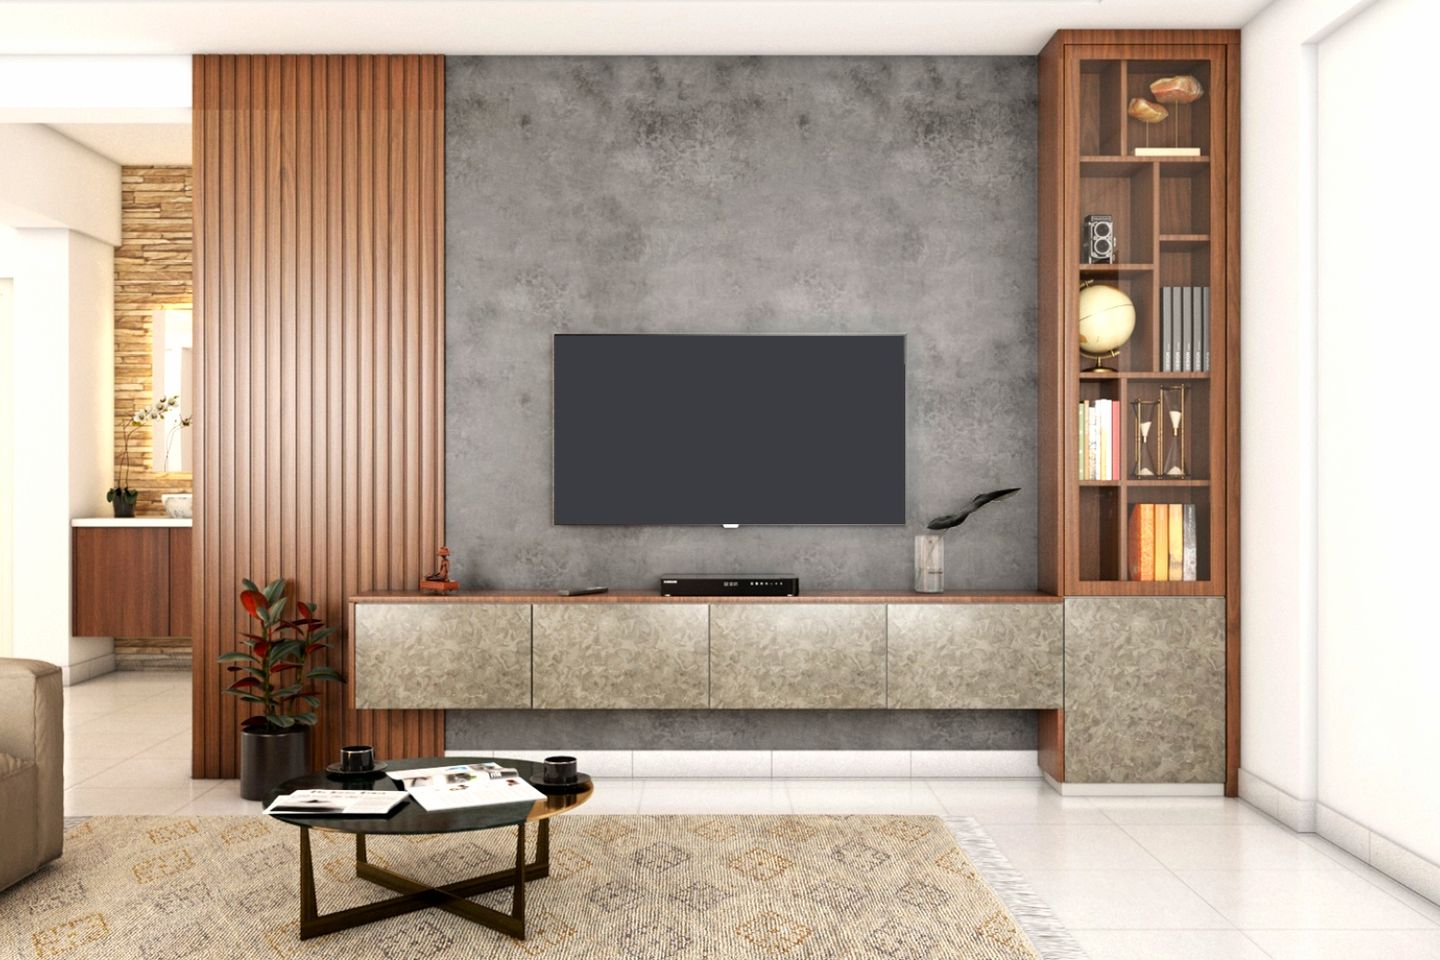 12x11 Ft TV Unit Design With Grey Wall And Fluted Panels - Livspace